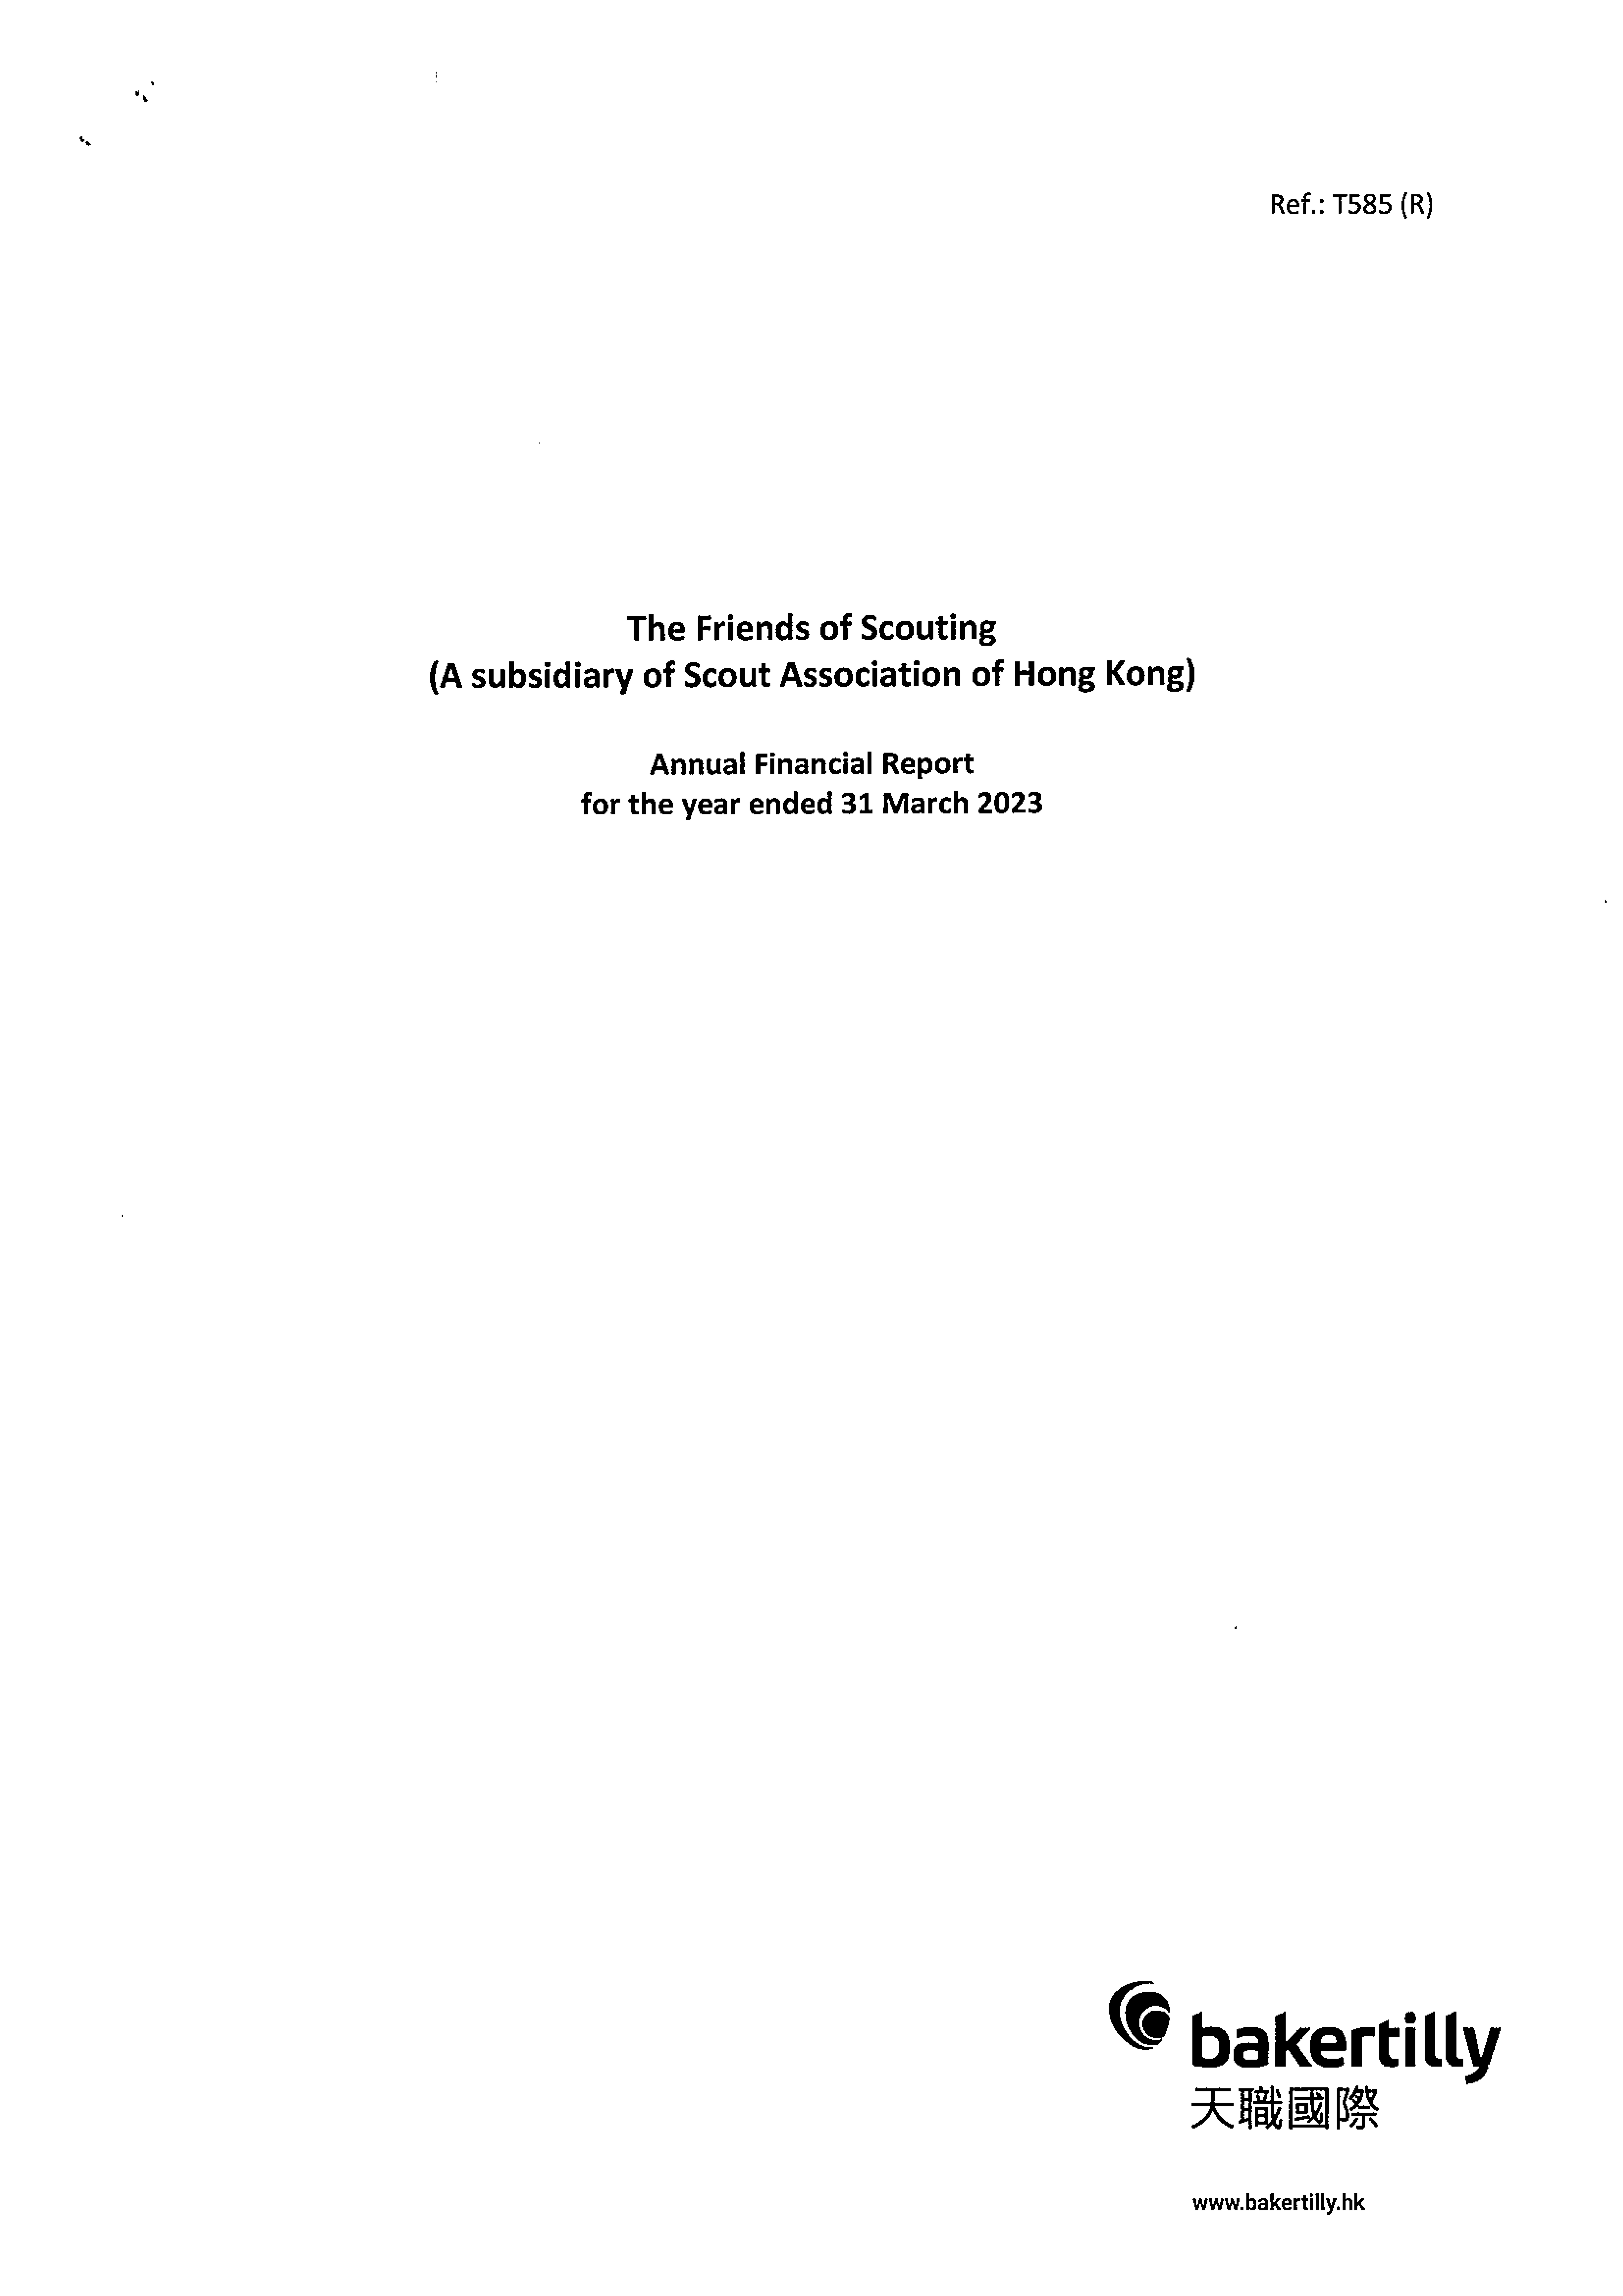 Annual Financial Report for the year ended 31 March 2023 (English Version Only)